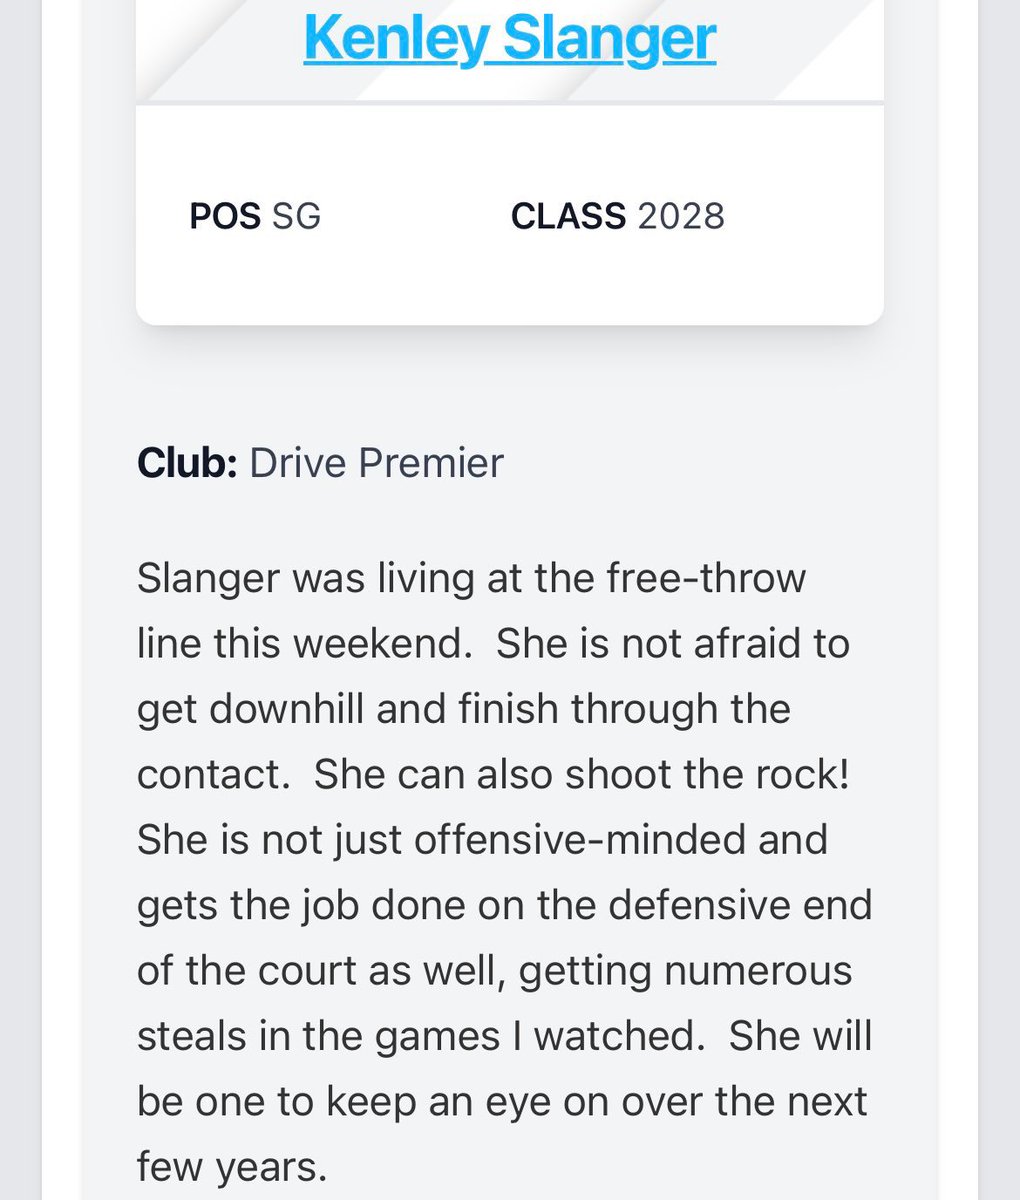 Some of our incoming freshmen getting some love this AAU season 🤩 @addisonrwypych @kenleyslanger